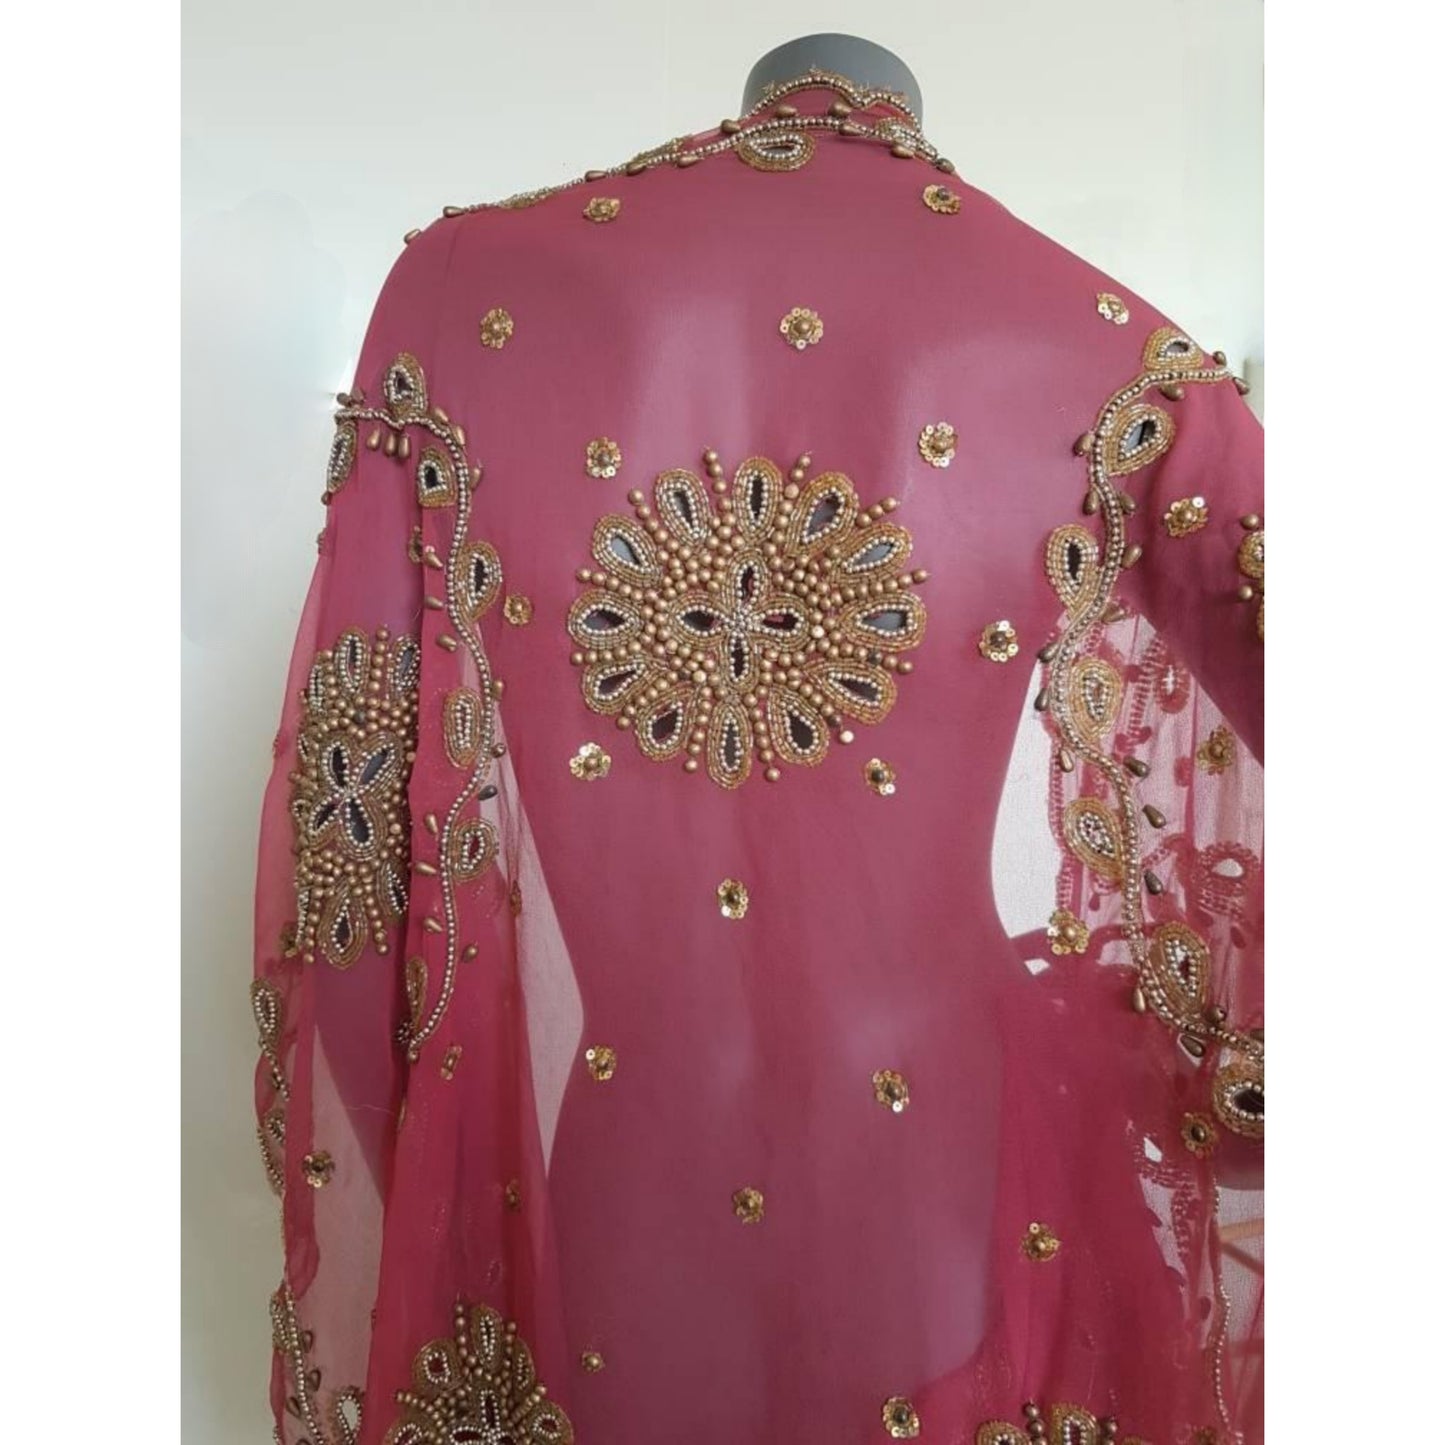 Draped warm pink kimono with beautiful hand embrodery with glass beads and cut outs (M)